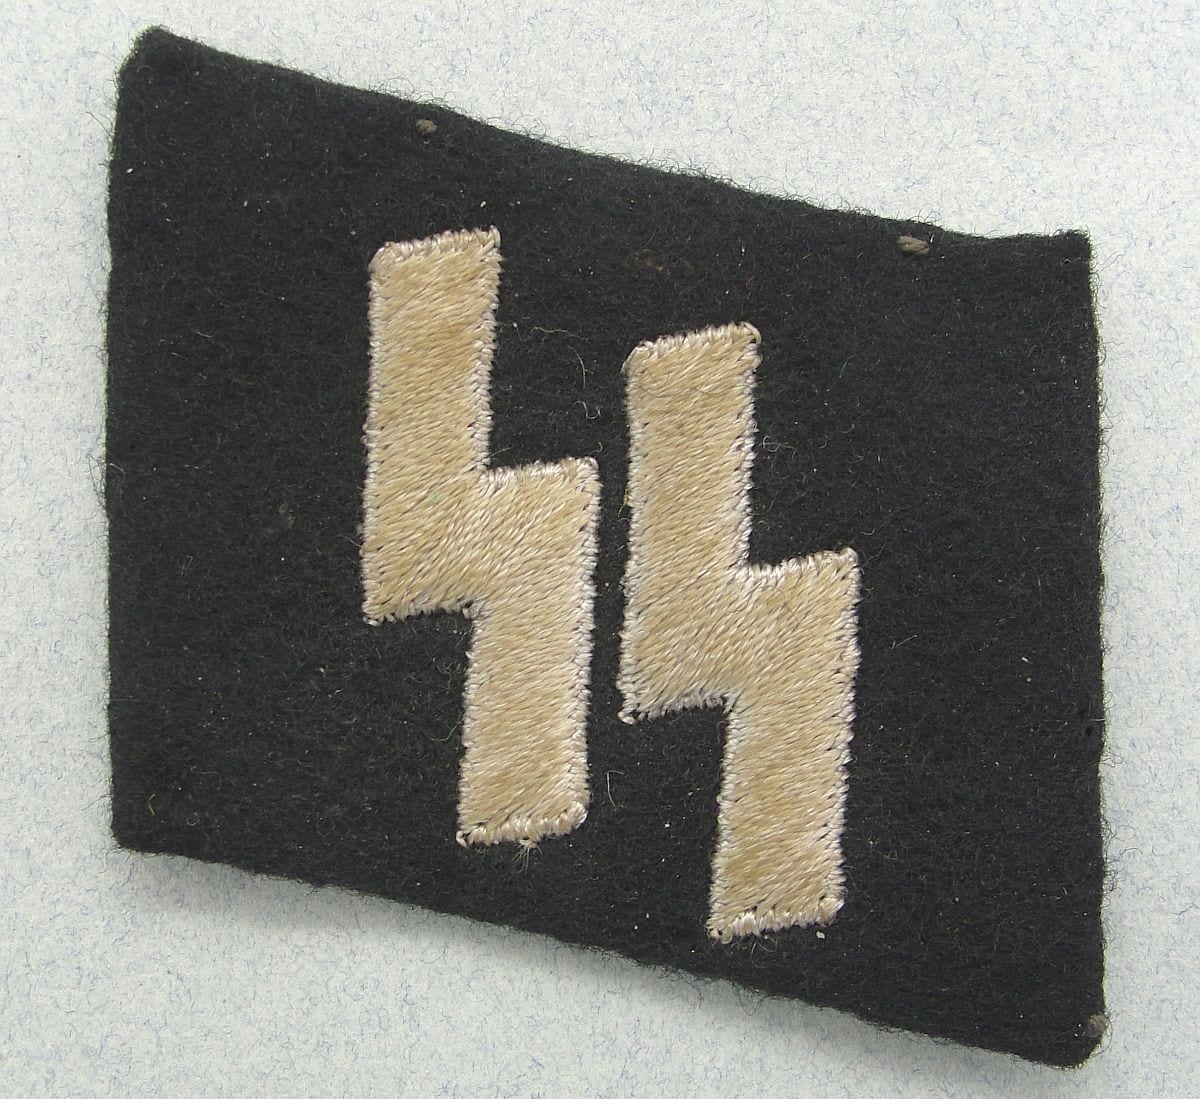 SS EM/NCO's Collar Tab, Machine Embroidered Version